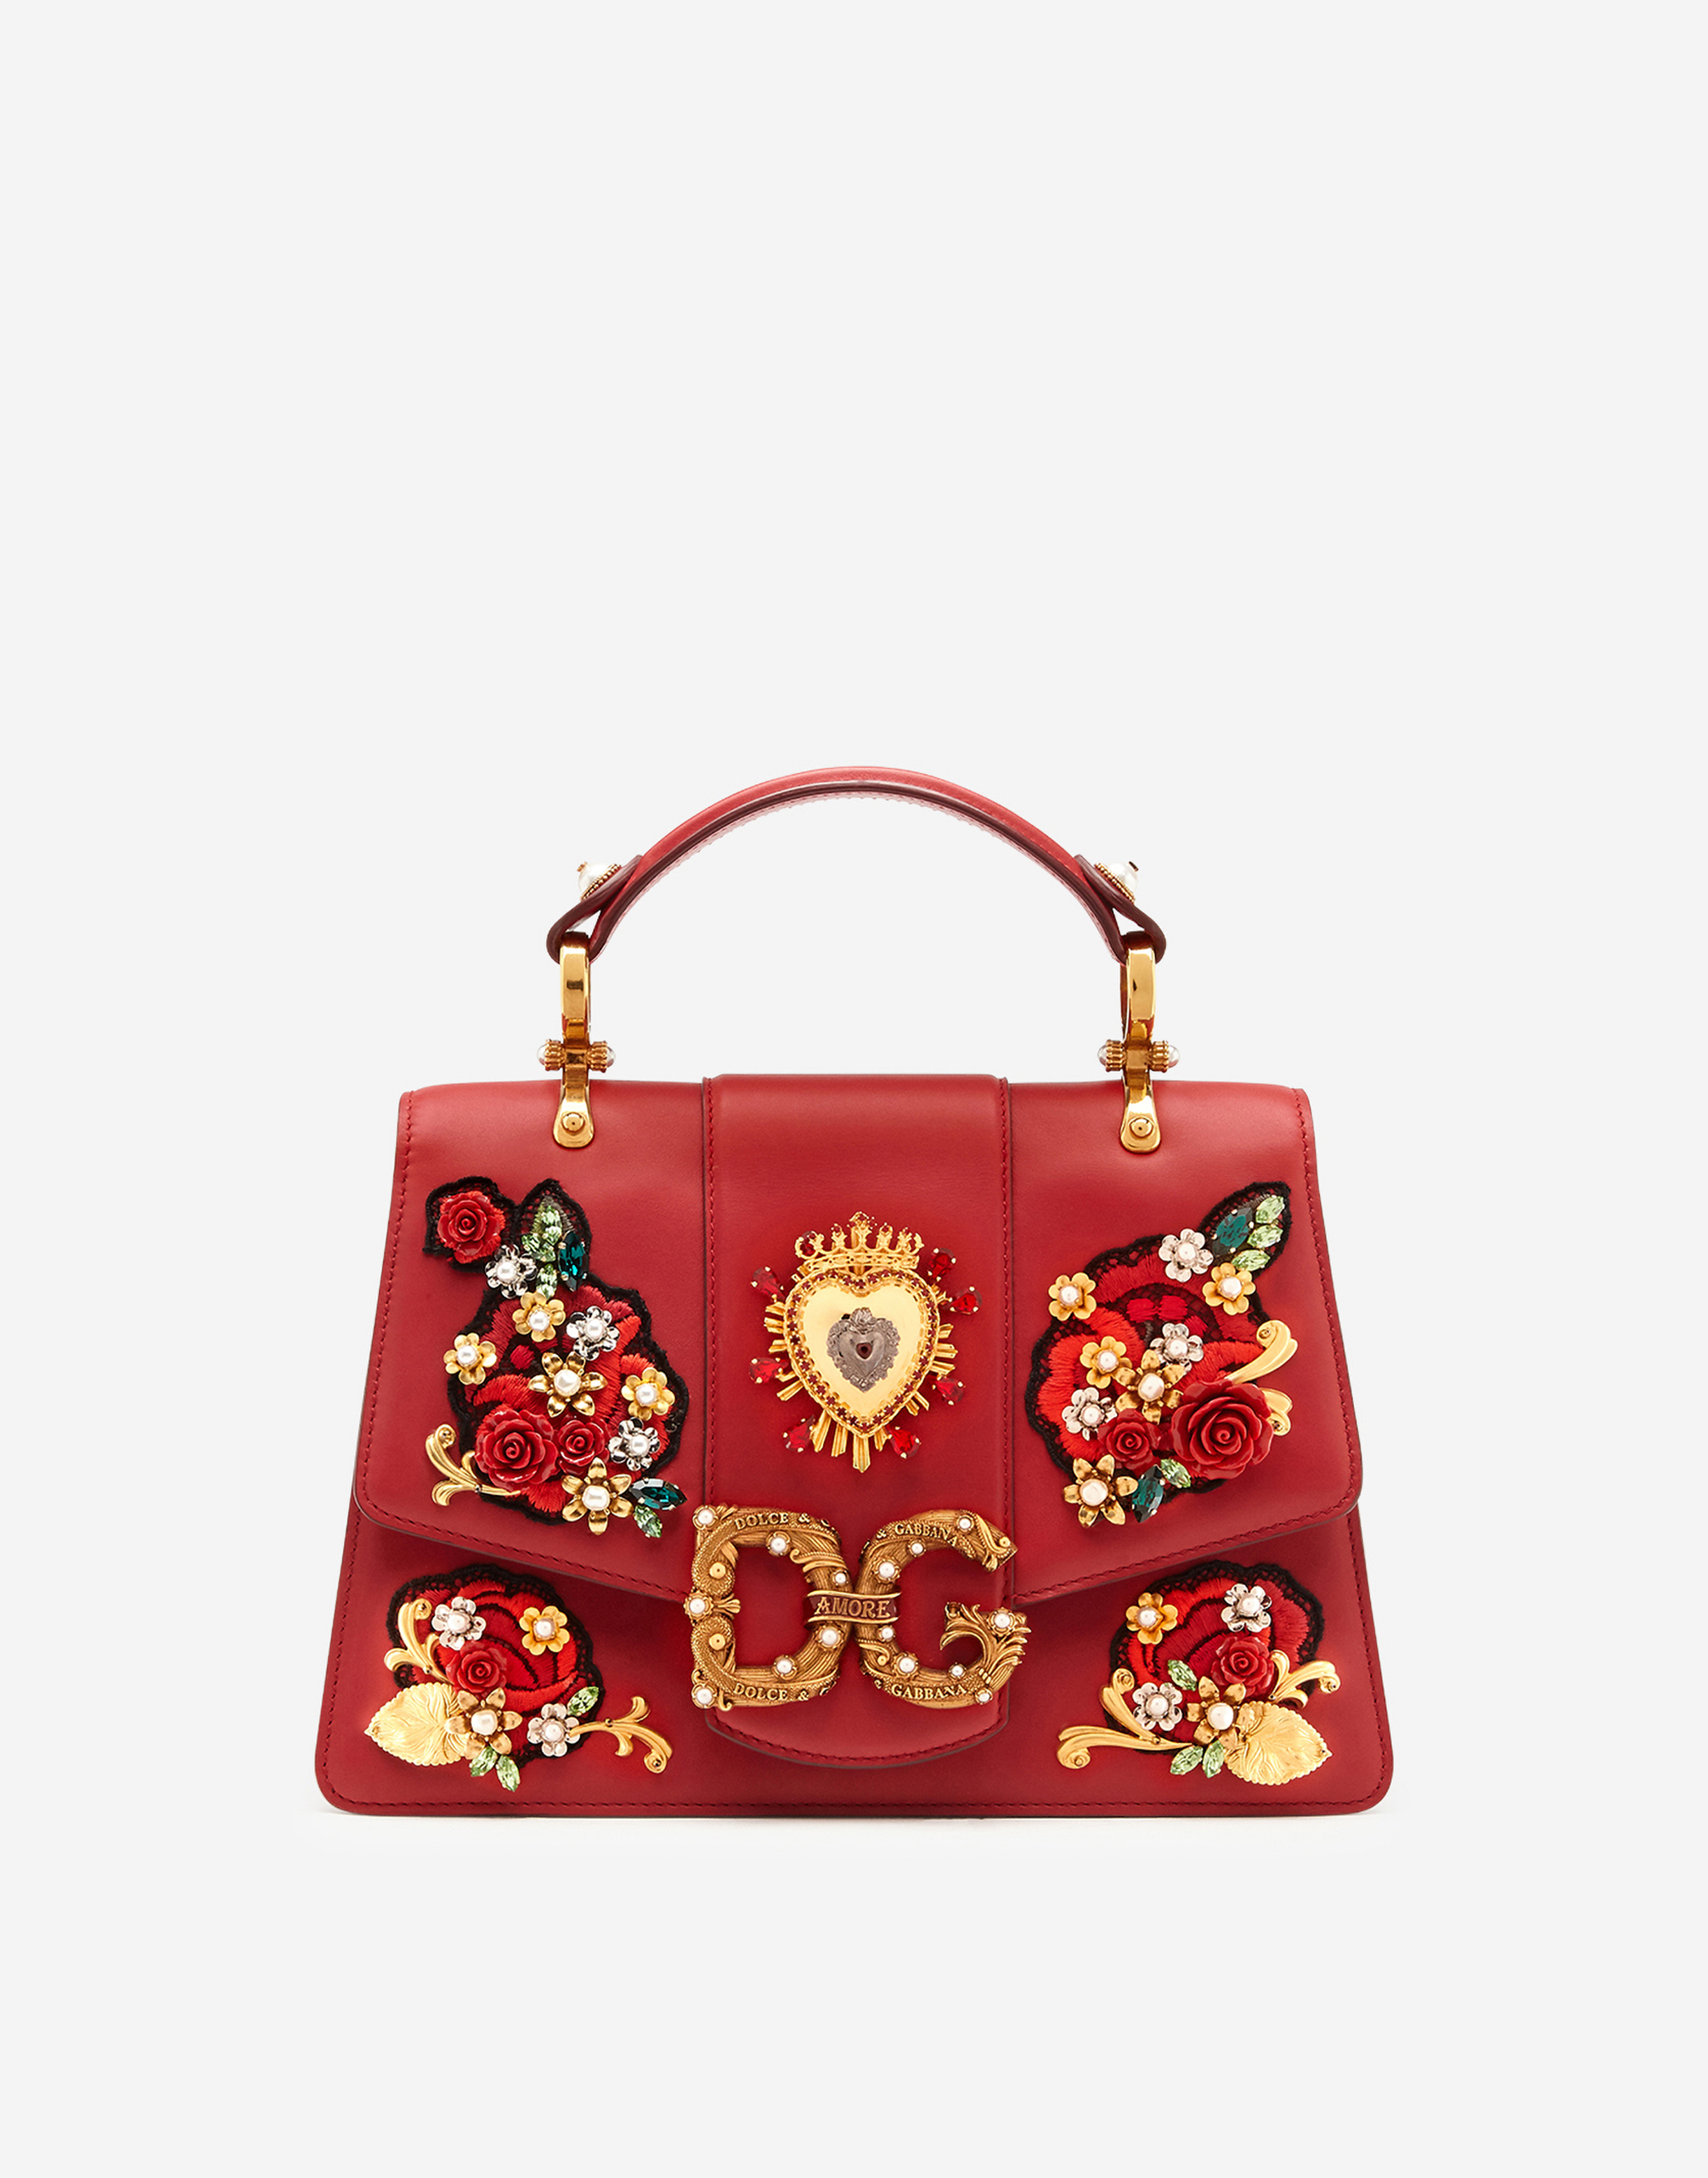 DOLCE & GABBANA DG AMORE BAG IN CALFSKIN WITH FLORAL JEWEL EMBROIDERY